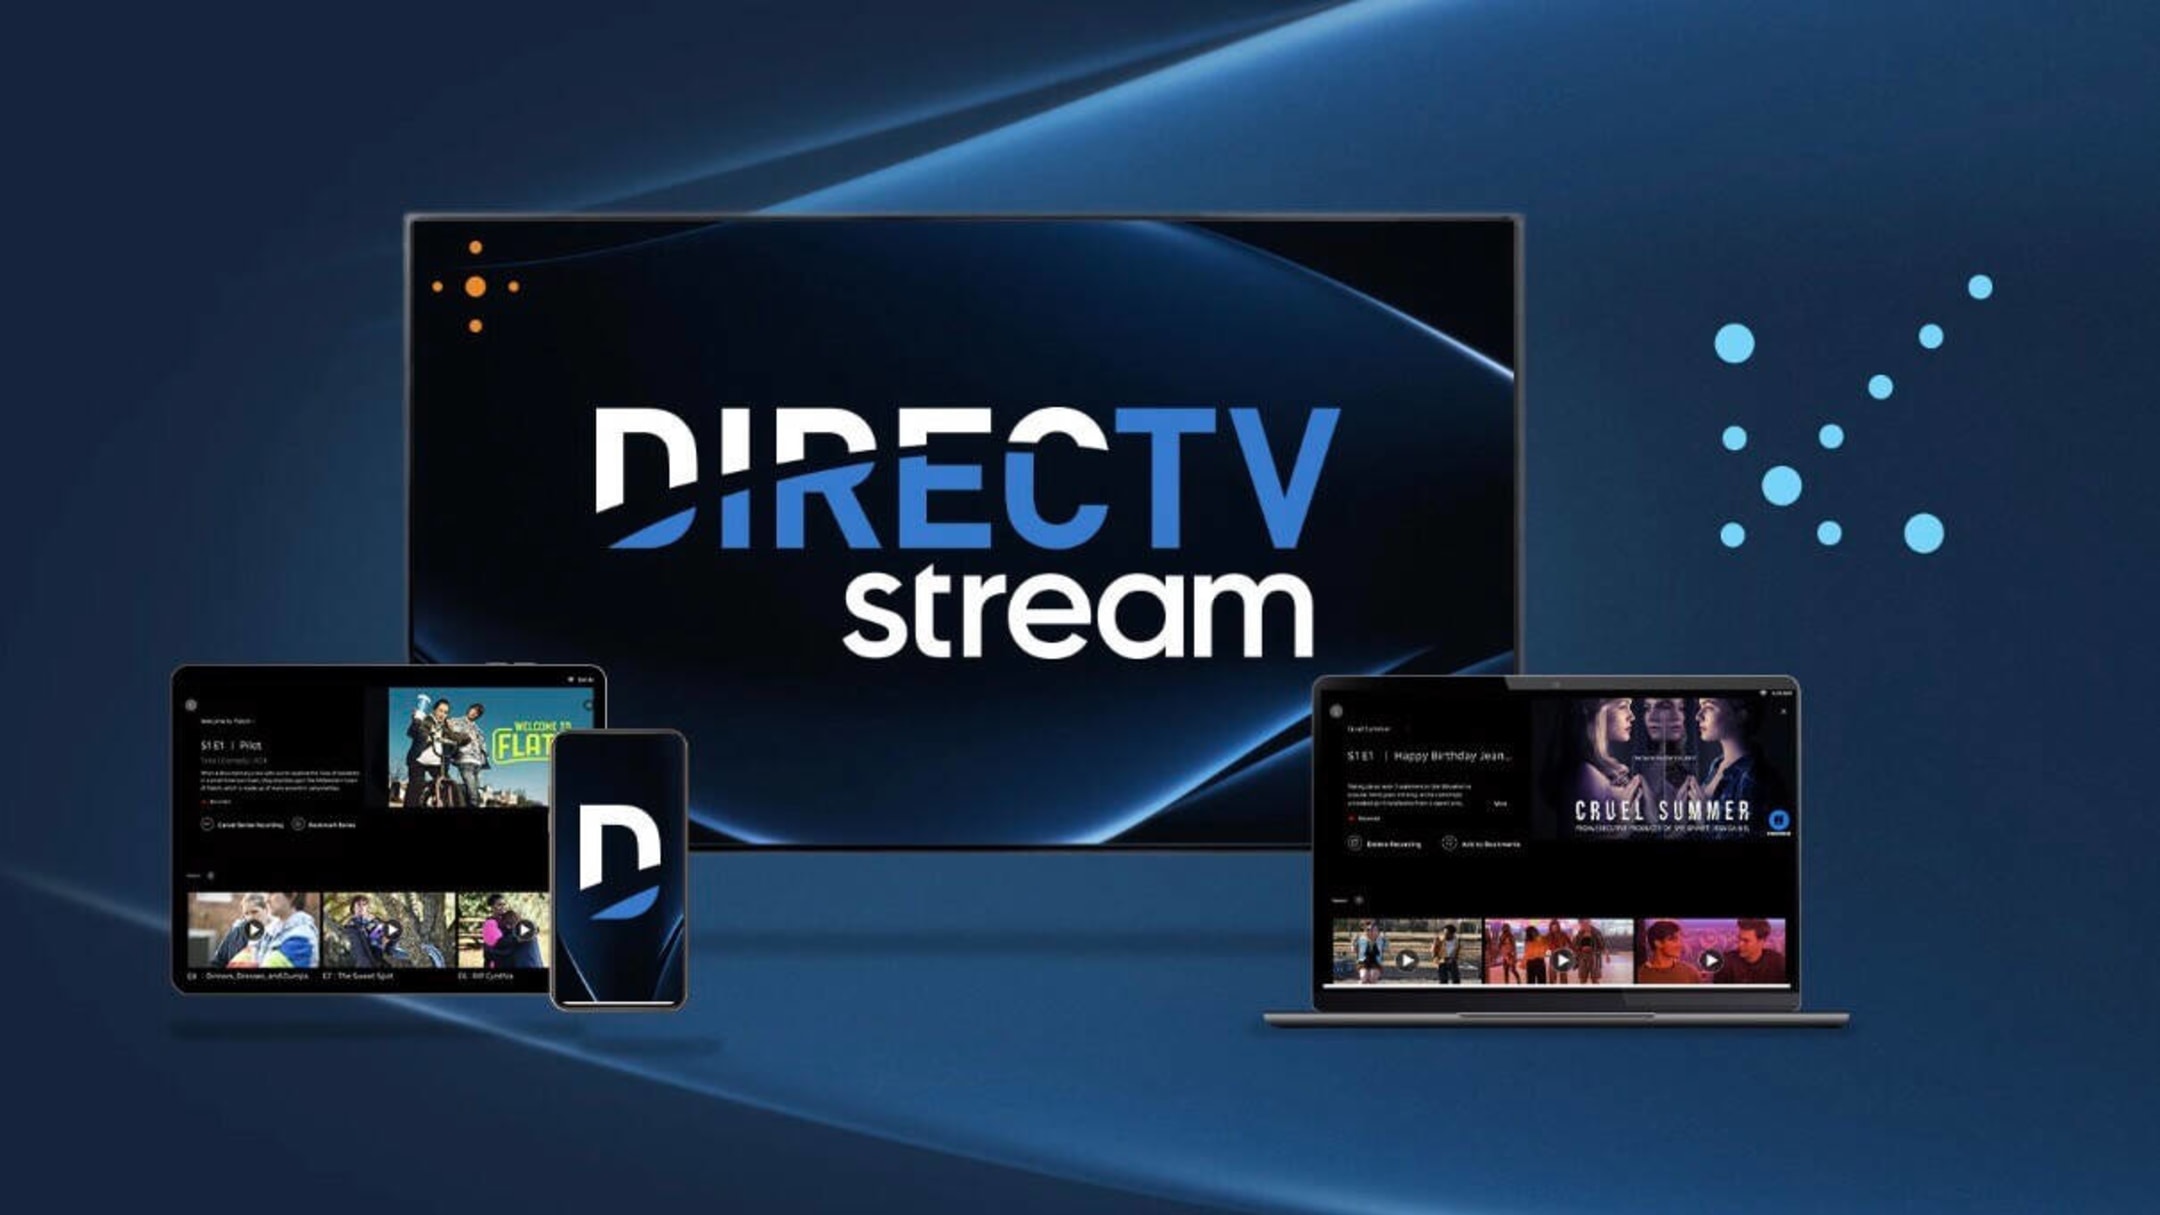 DirecTV Stream Review: A Comprehensive Streamer for All Types of Customers